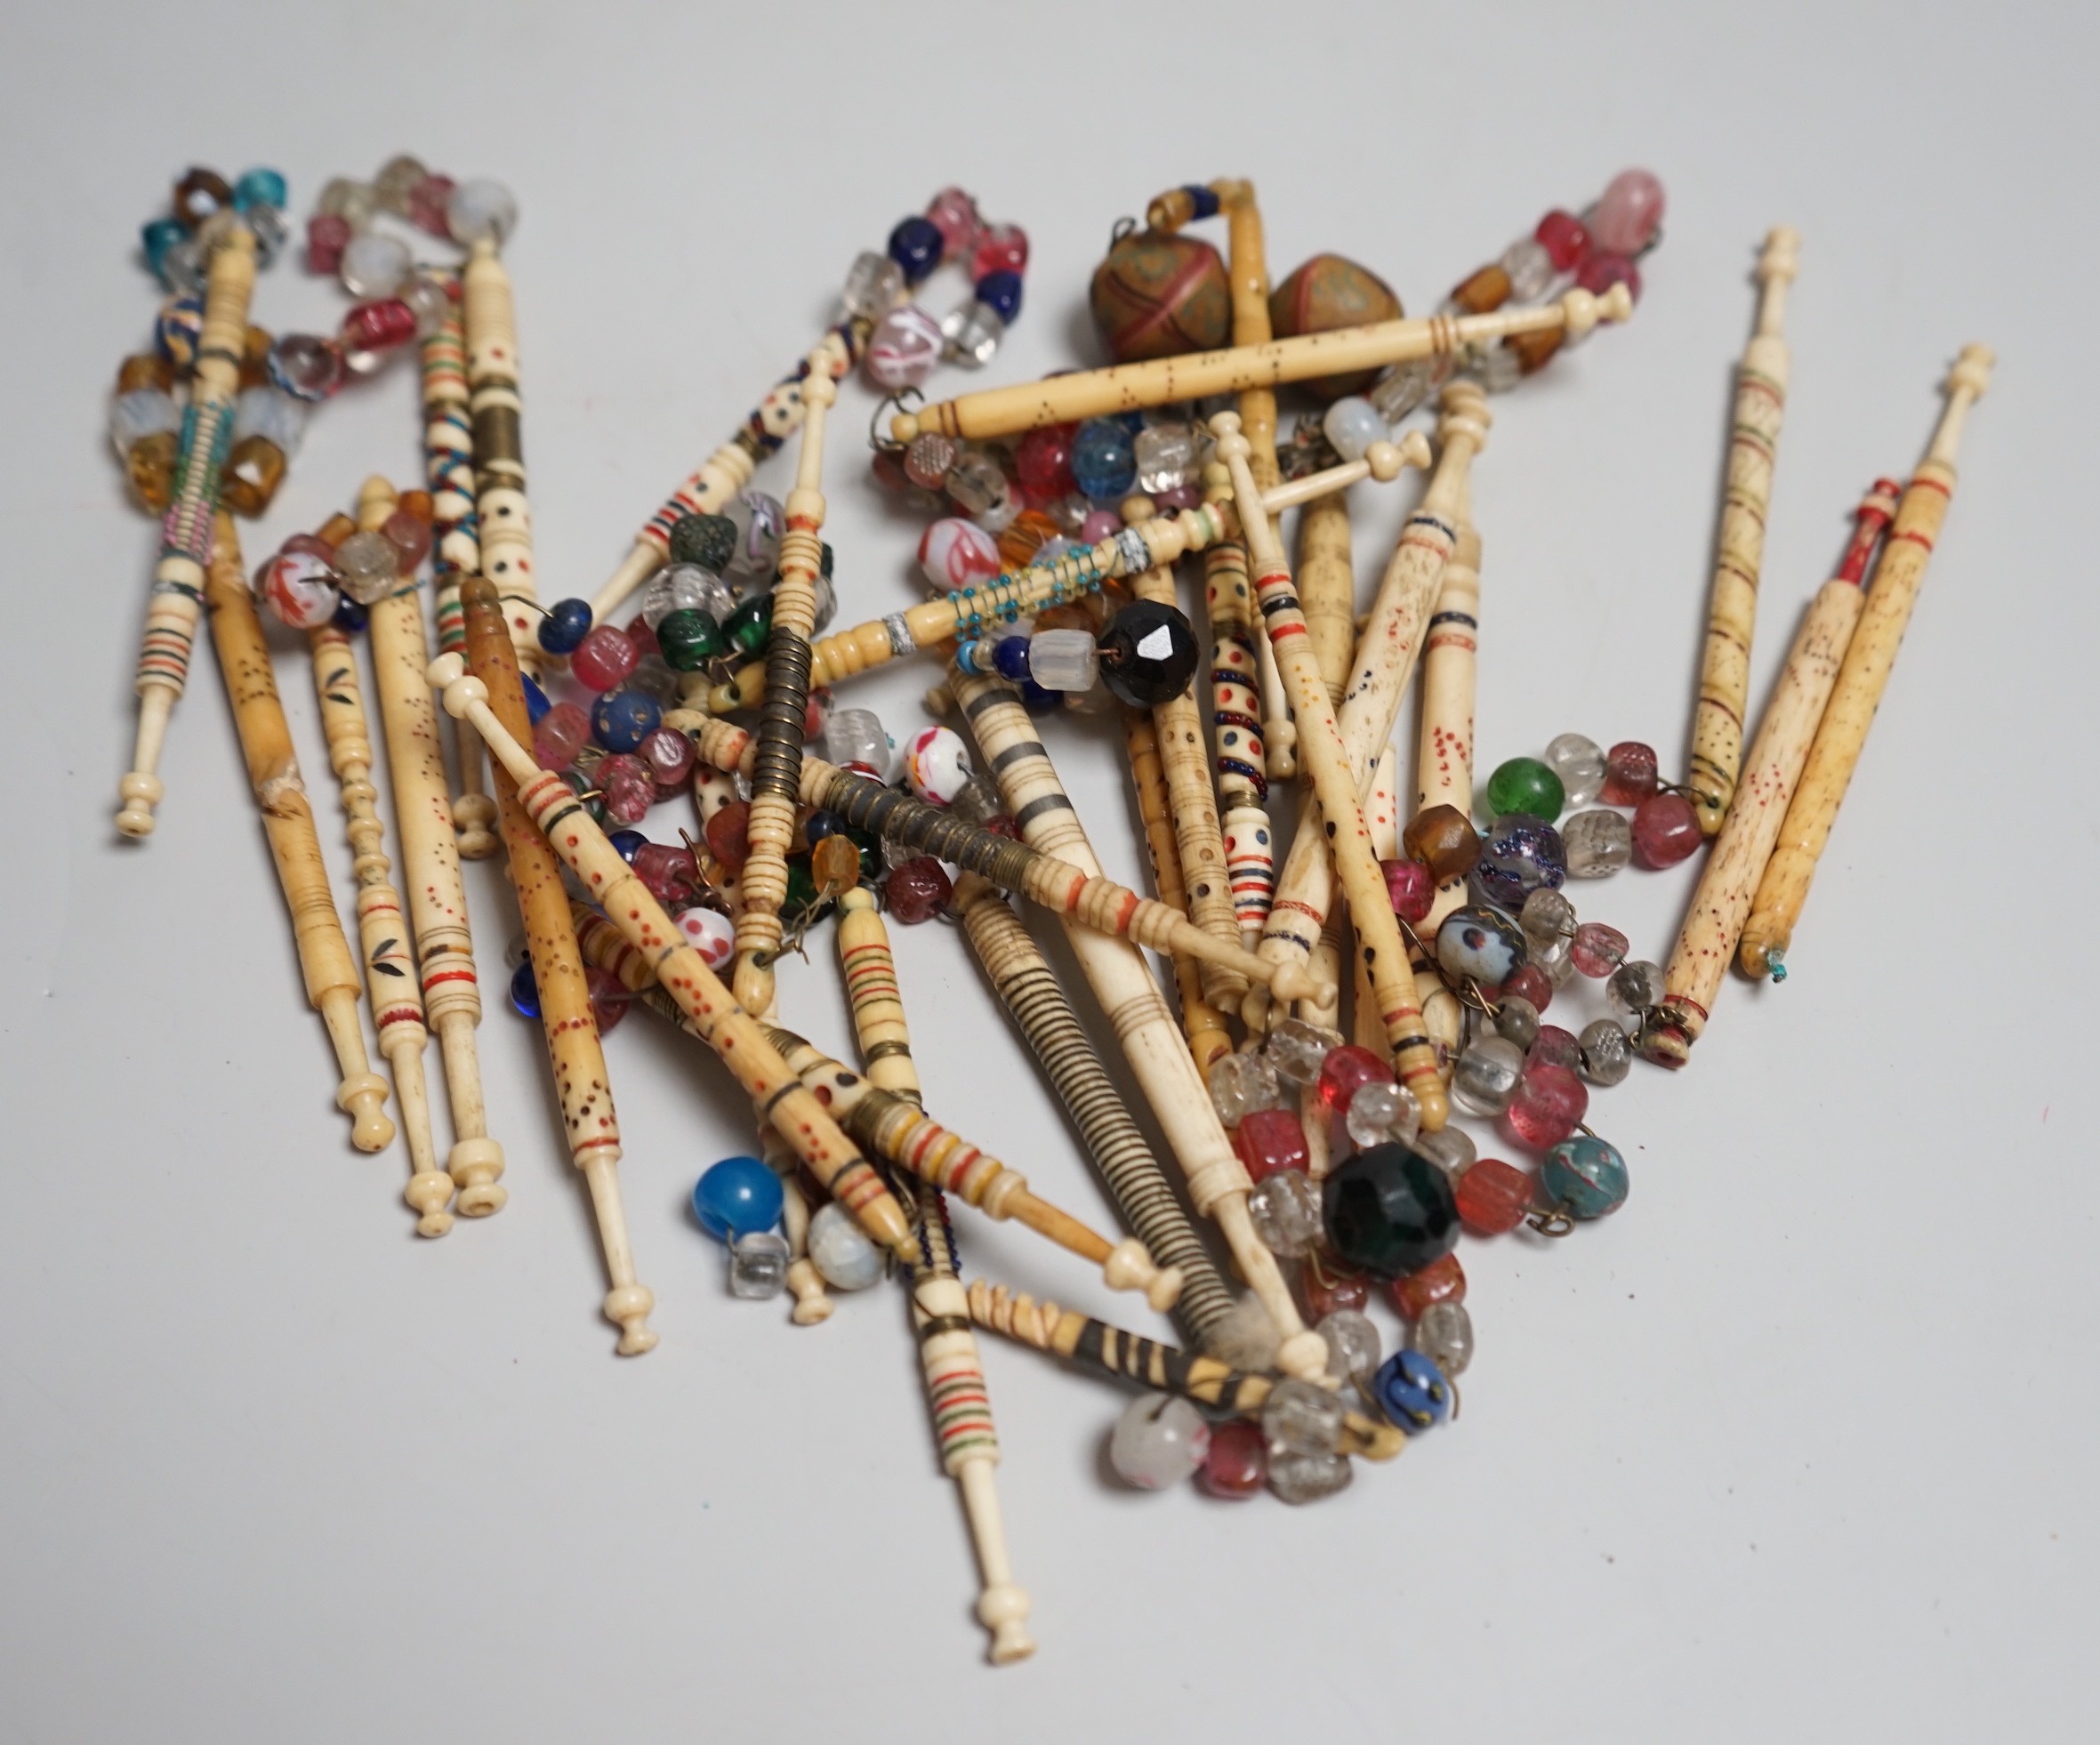 Twenty 19th century ornately decorated lace bobbins with glass bead tops and eleven carved bobbins with indistinctly carved surnames and names